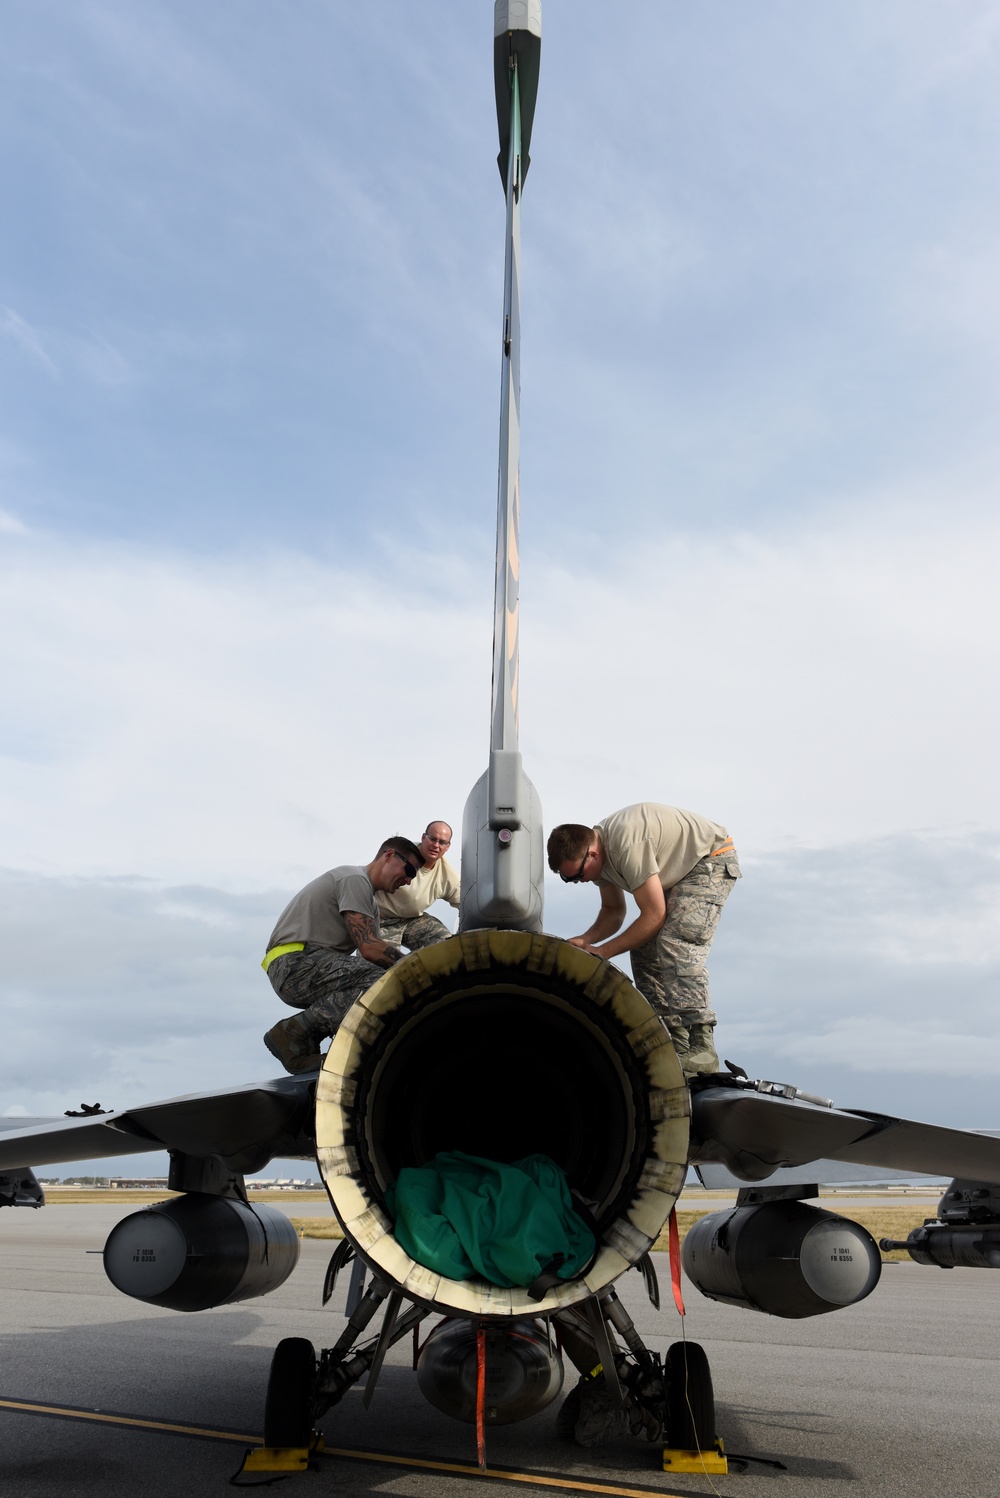 180th Fighter Wing Flies South for Training